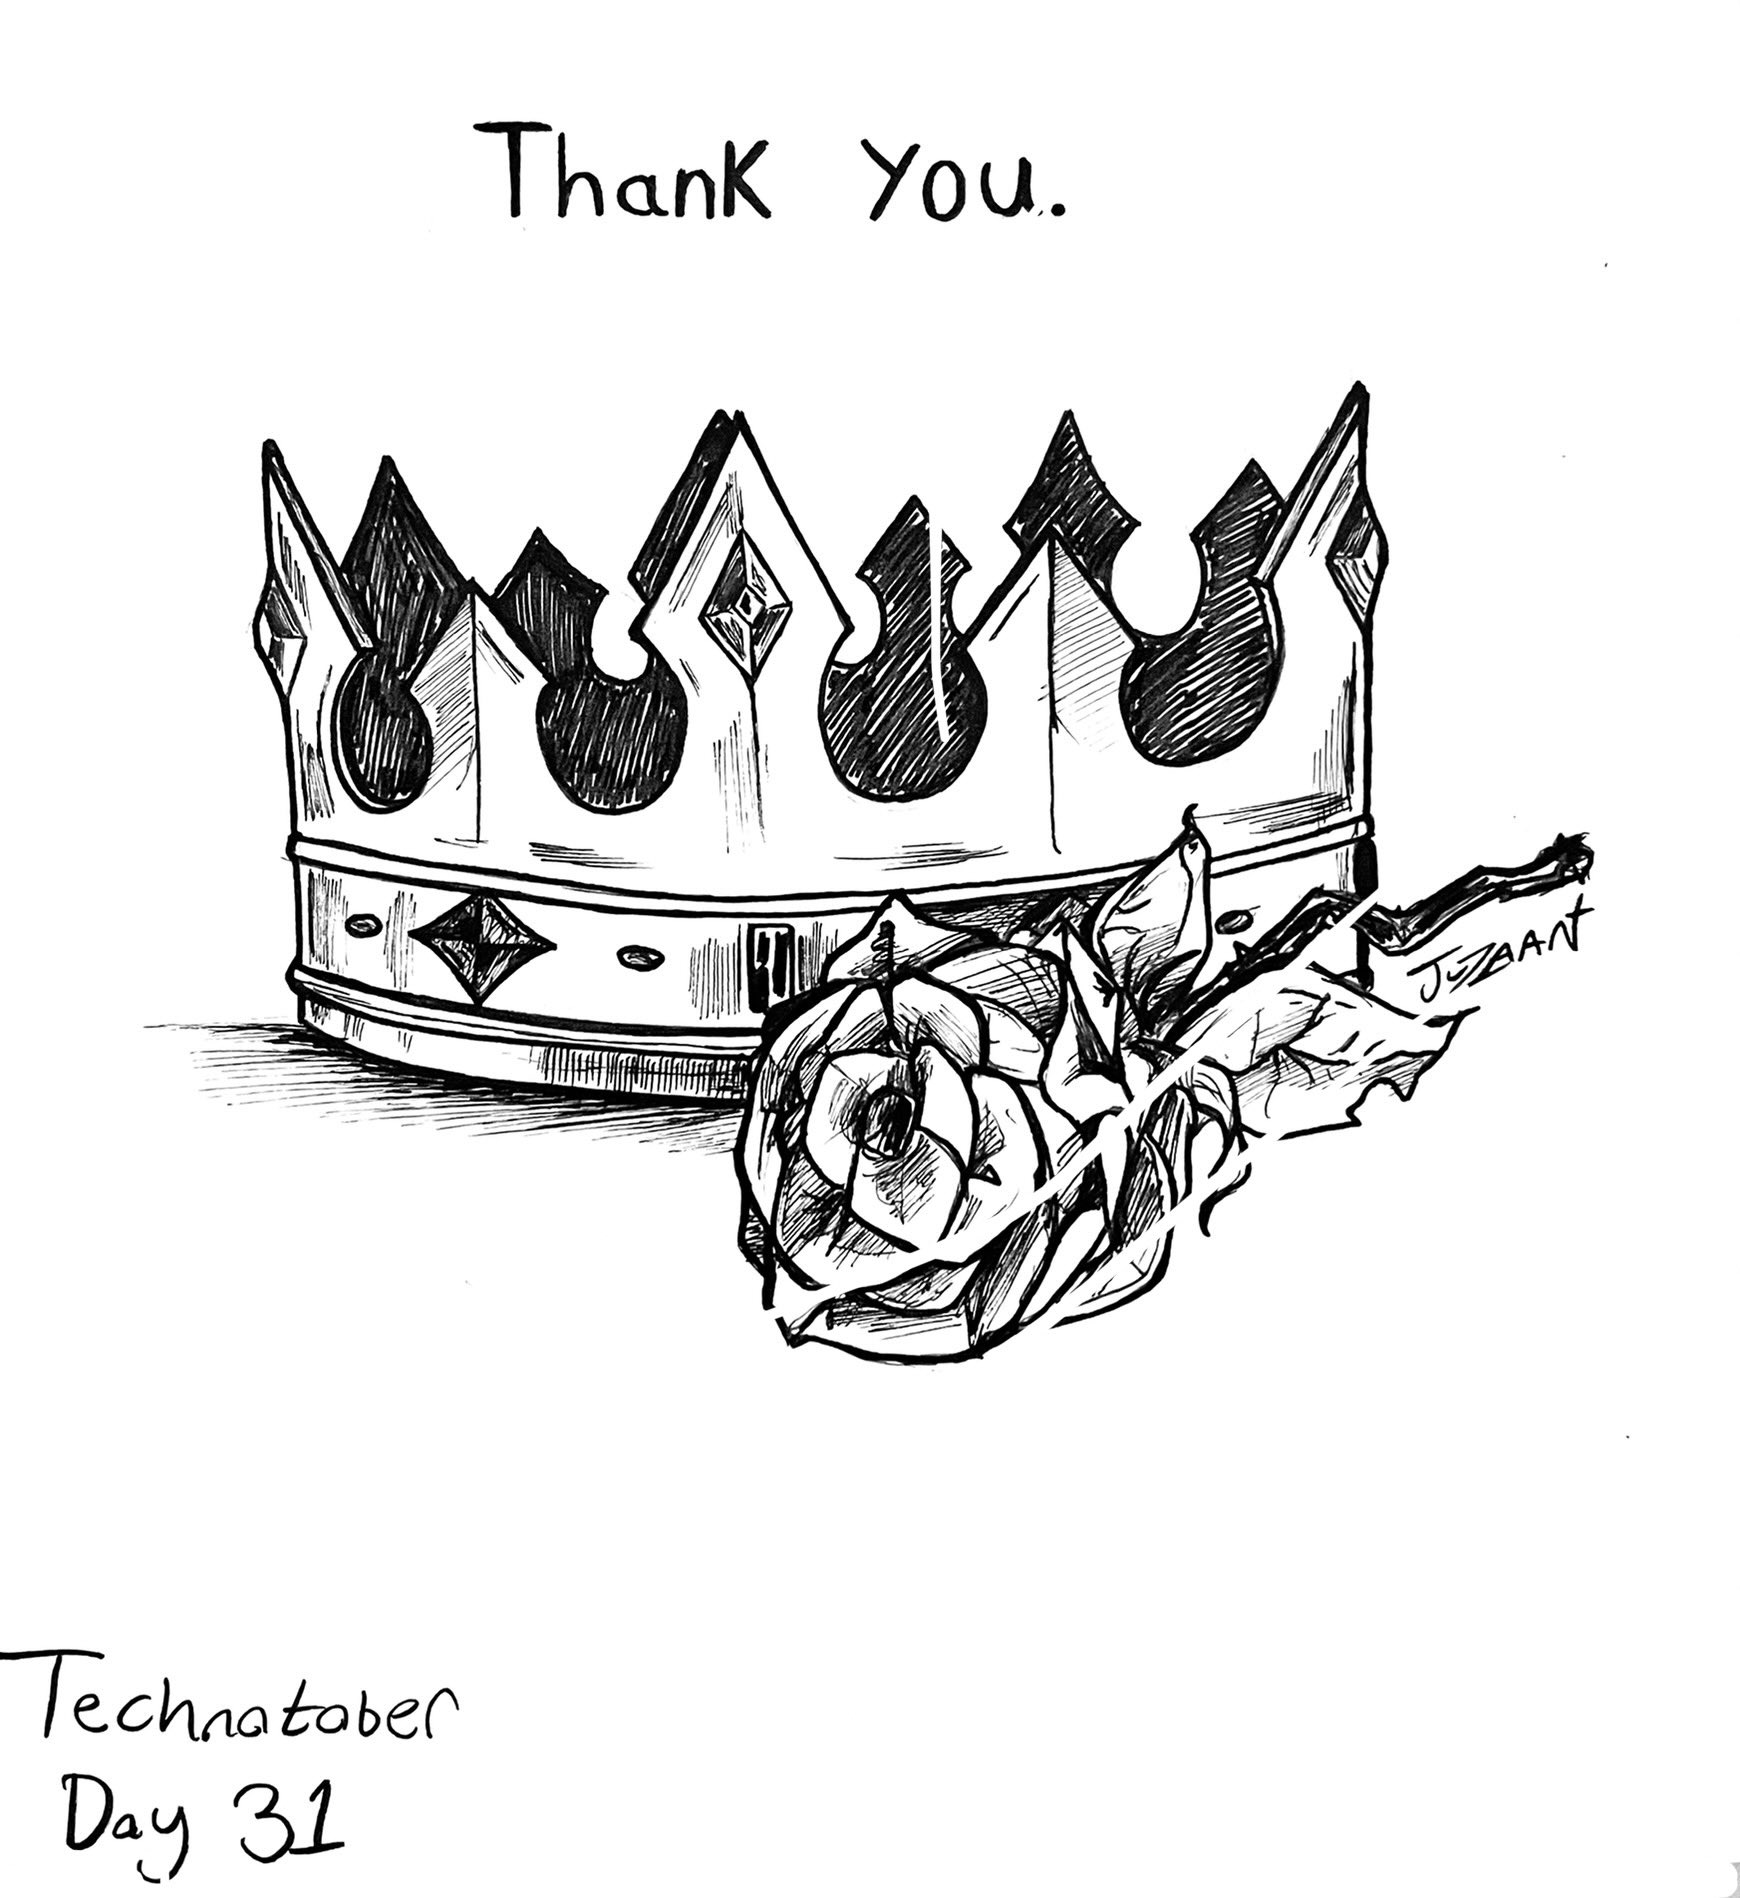 My drawing of technoblade's crown